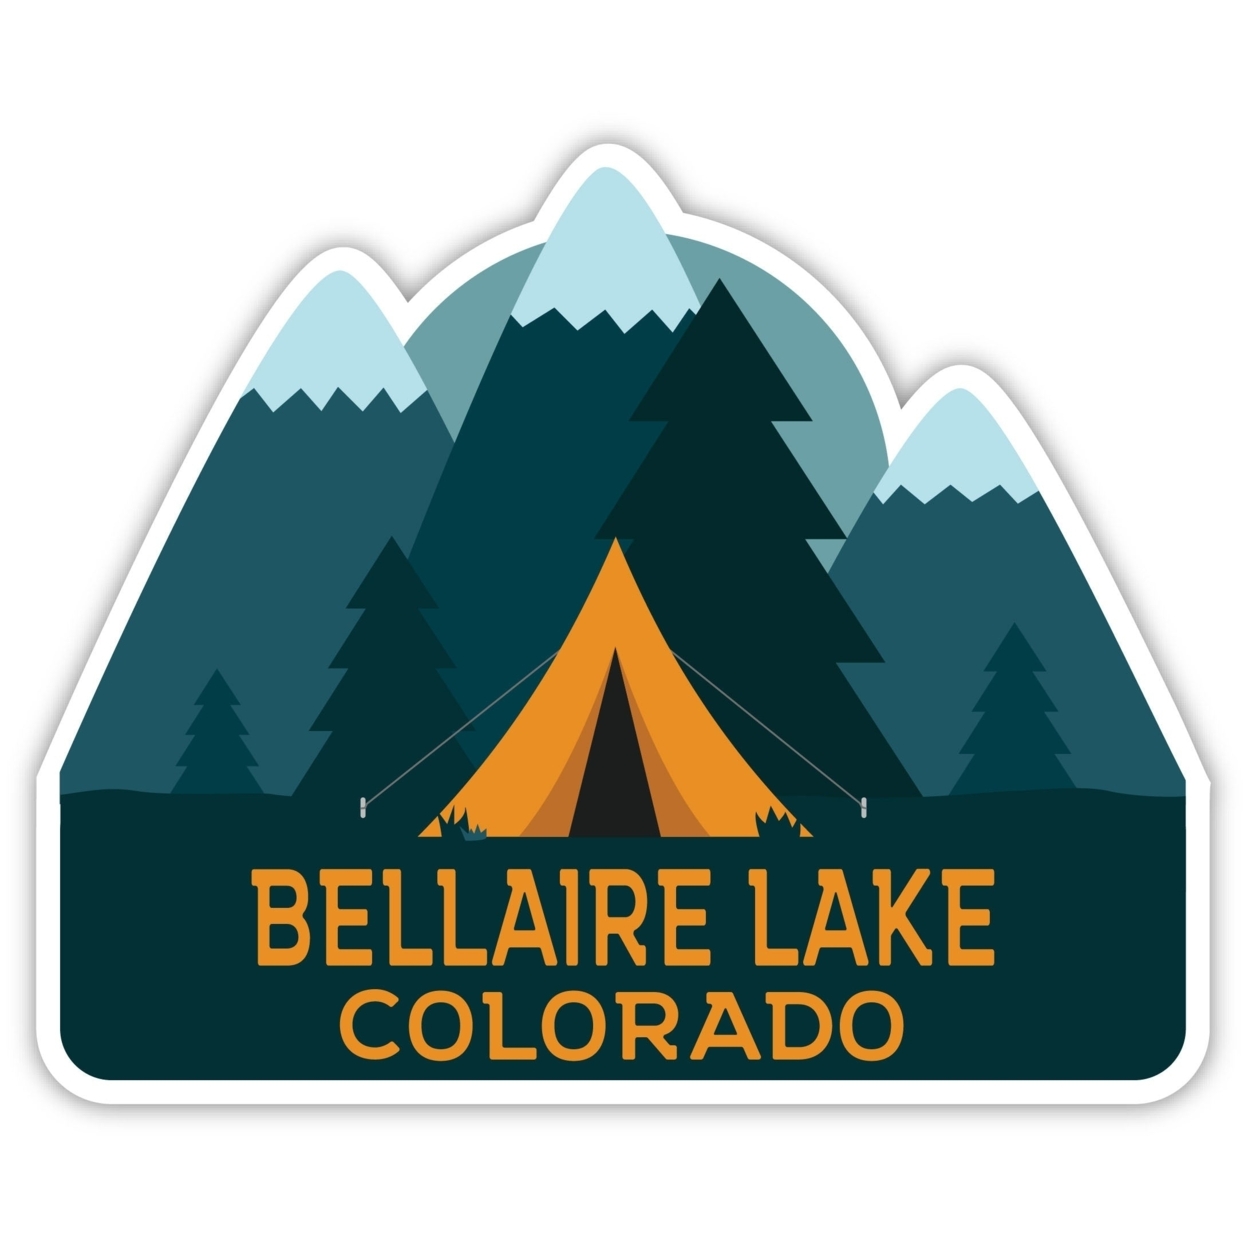 Bellaire Lake Colorado Souvenir Decorative Stickers (Choose Theme And Size) - 4-Pack, 2-Inch, Tent